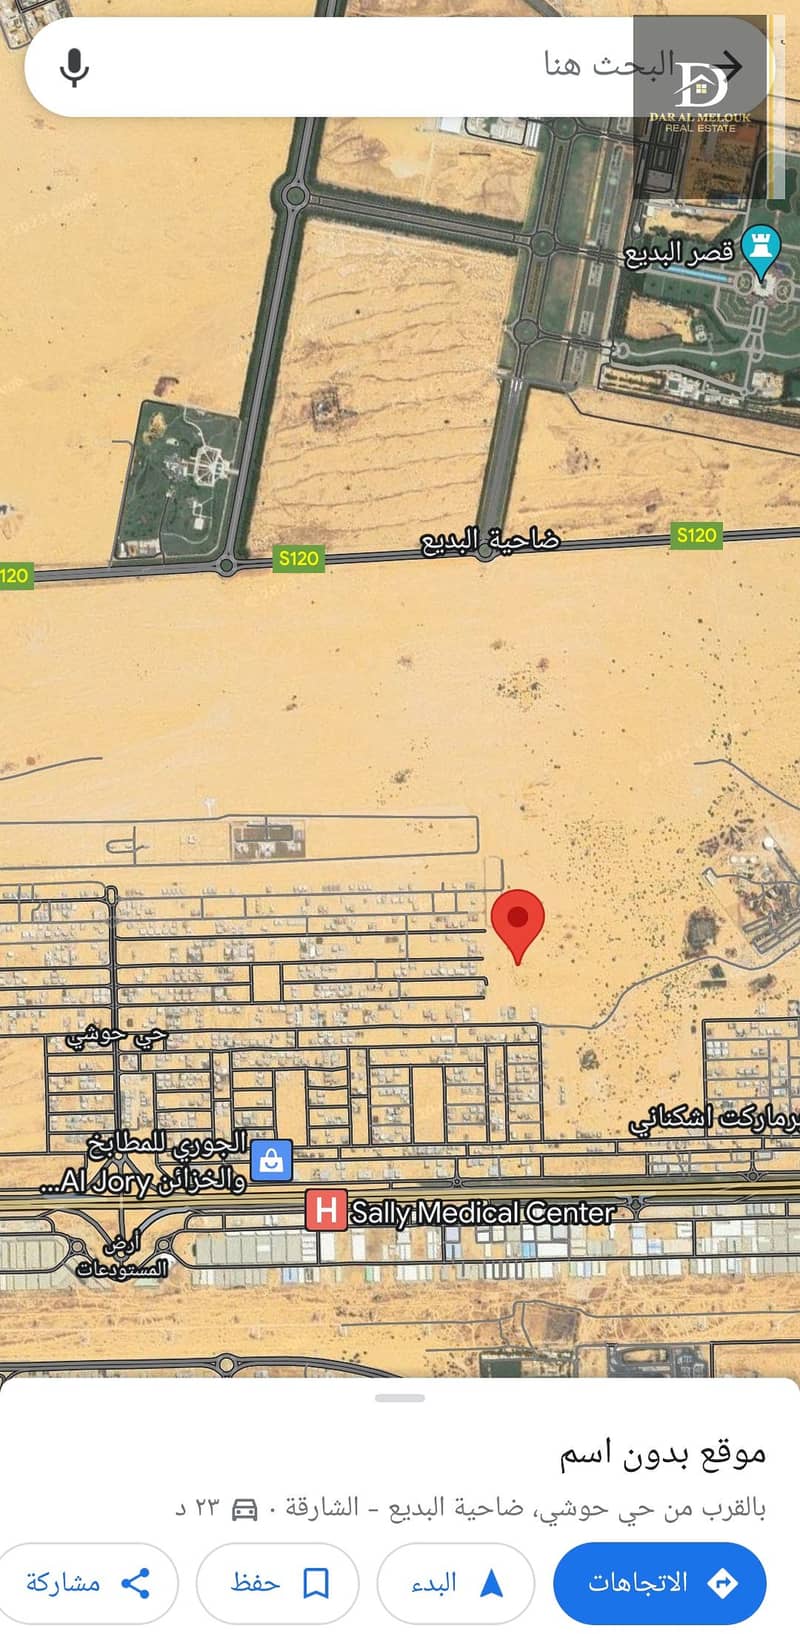 For sale in Sharjah, Al-Hoshi area, residential and investment land, area of ​​5400 feet, villa permit, ground and first, 50% of the roof, a special location, close to services. The Al-Hoshi area is characterized by easy entry and exit, close to Maliha St